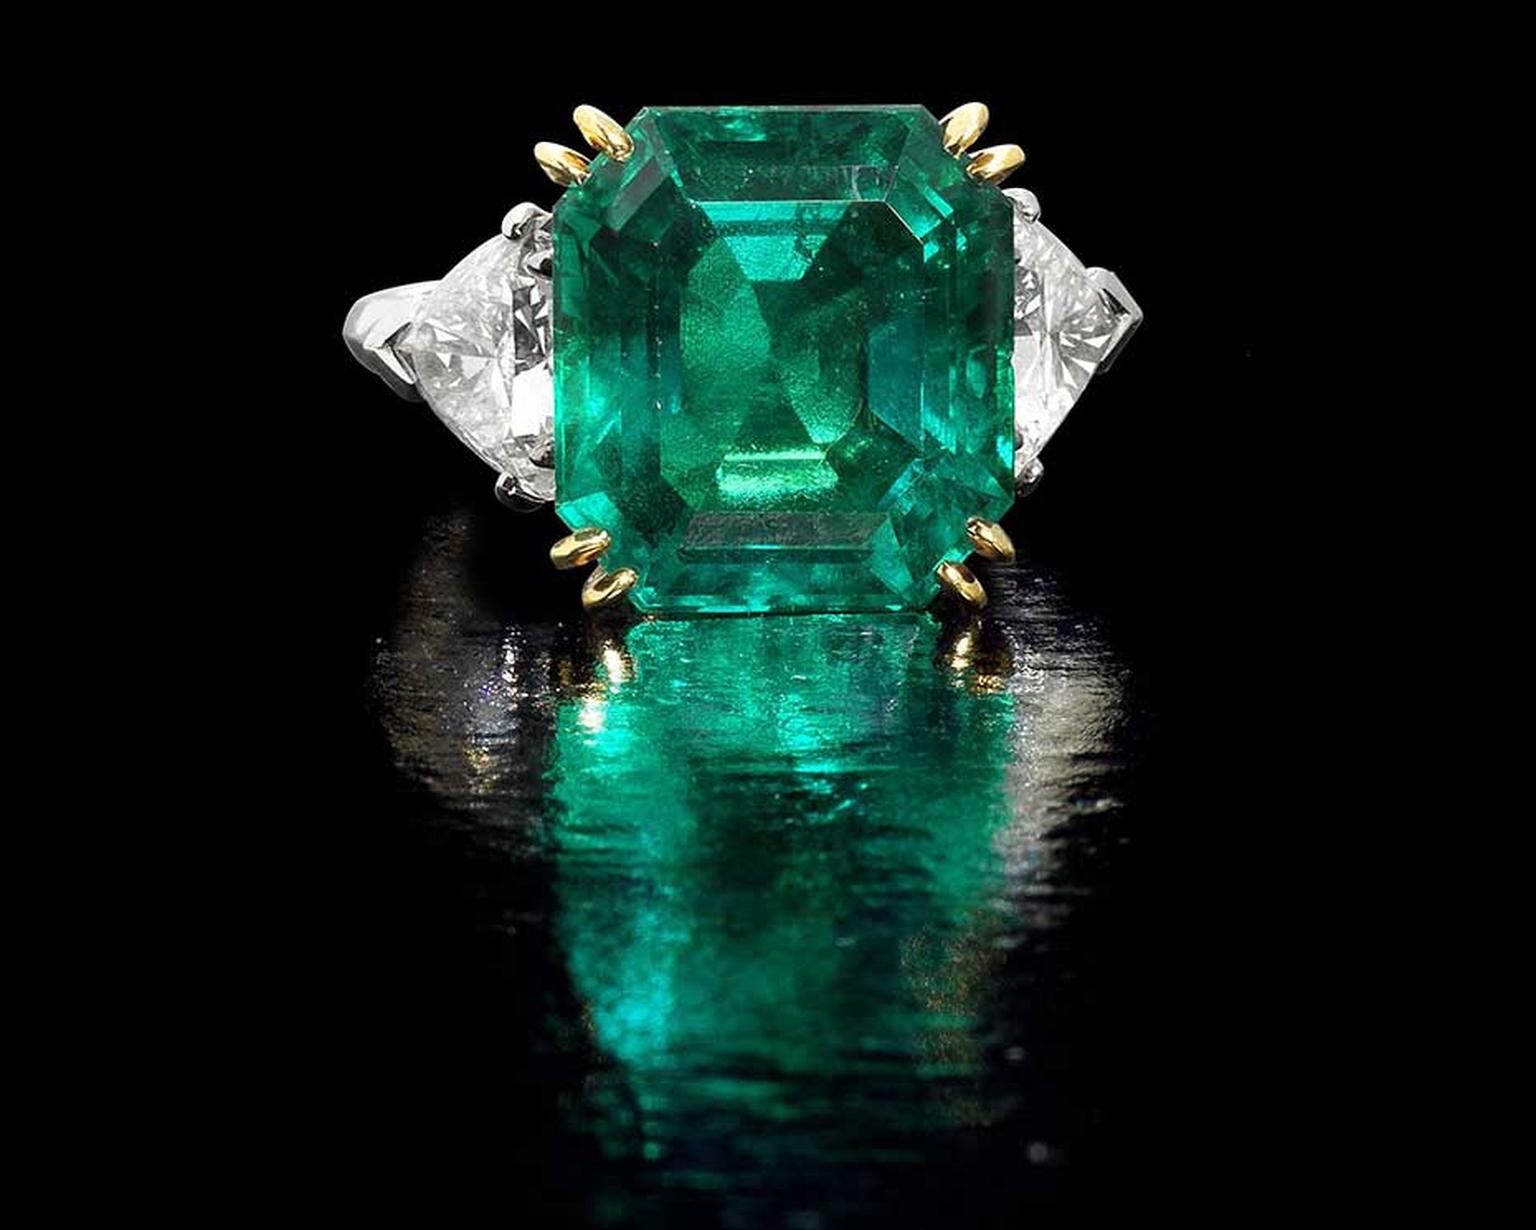 Lot 192, a Colombian emerald and diamond ring. The octagonal step-cut emerald weighs 10.49ct, flanked by triangular-cut diamonds of approximately 2.00ct. Sold for £362,500  (estimate: £150,000-£200,000)